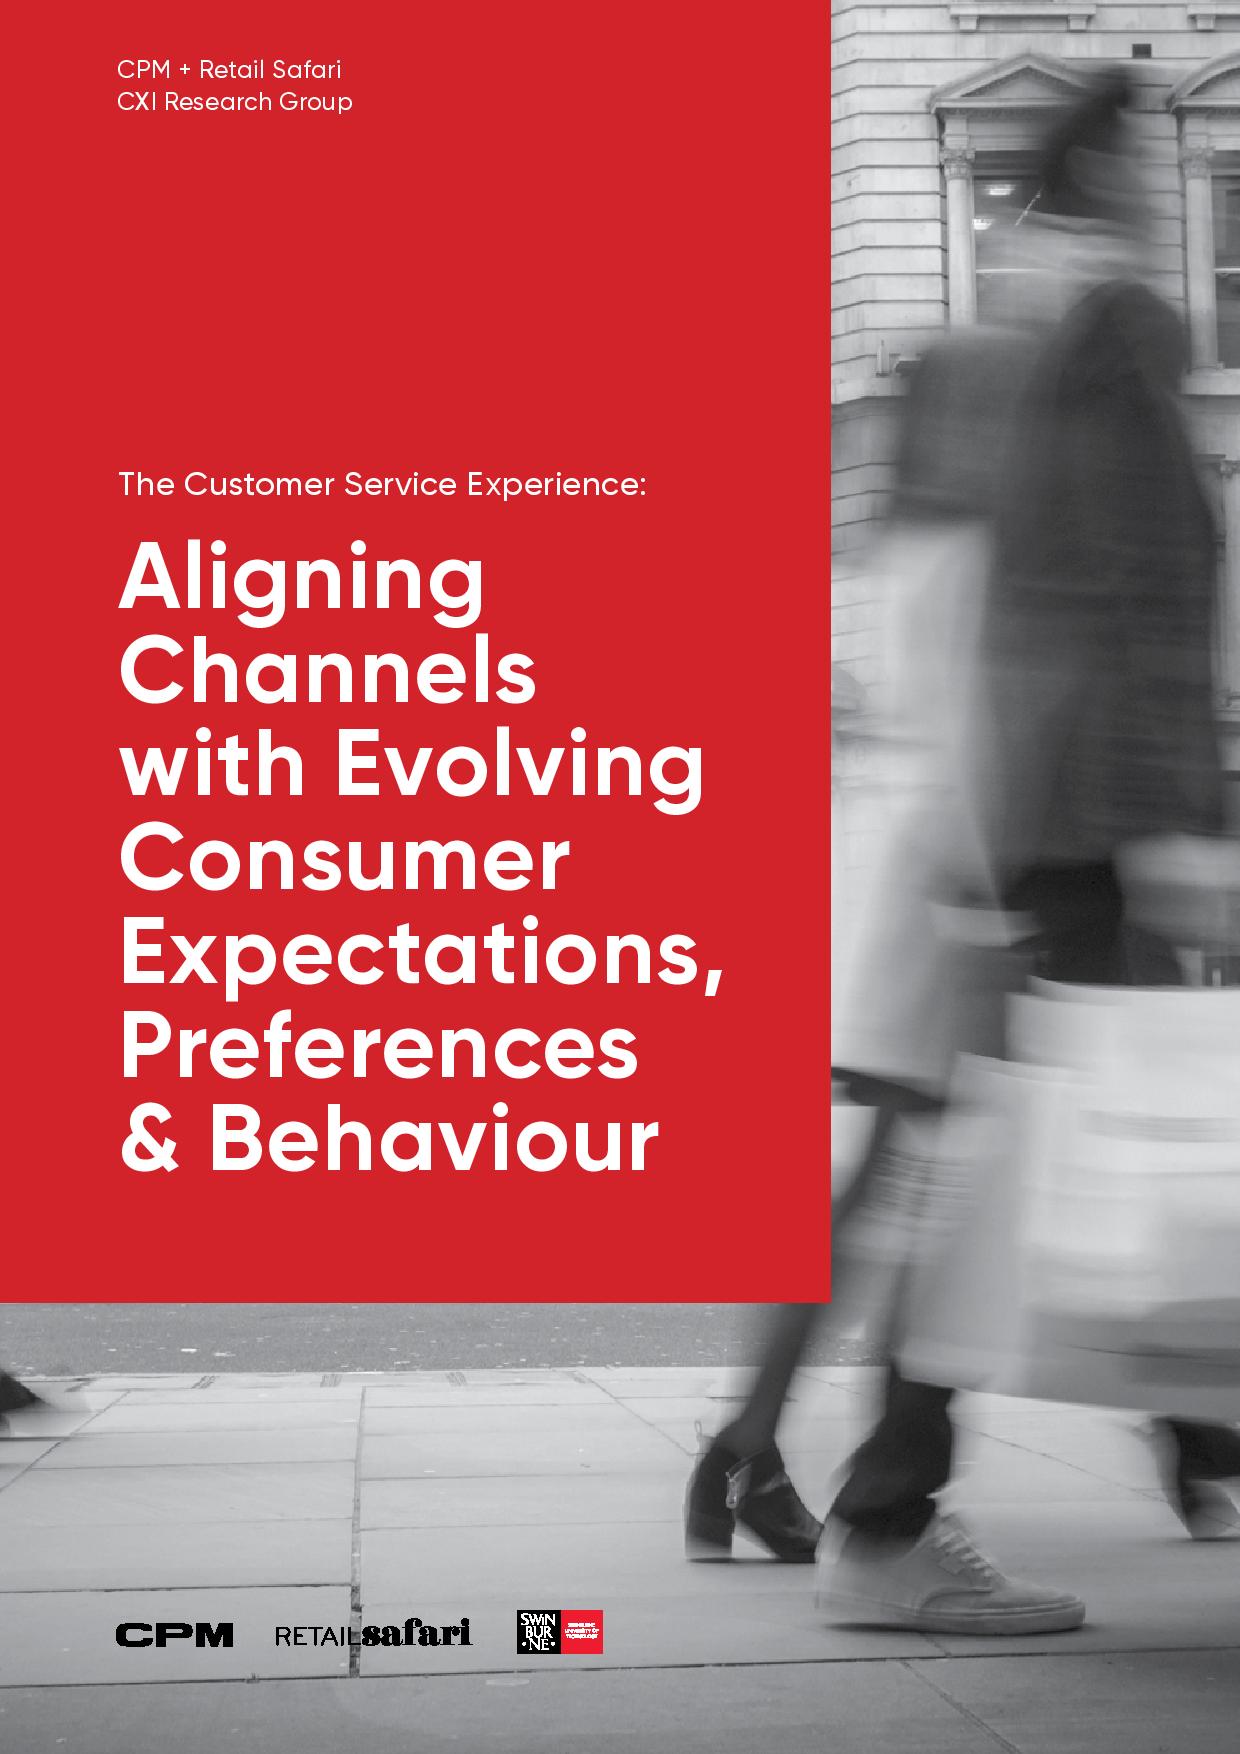 The Customer Service Experience: Aligning Channels with Evolving Consumer Expectations, Preferences & Behaviour